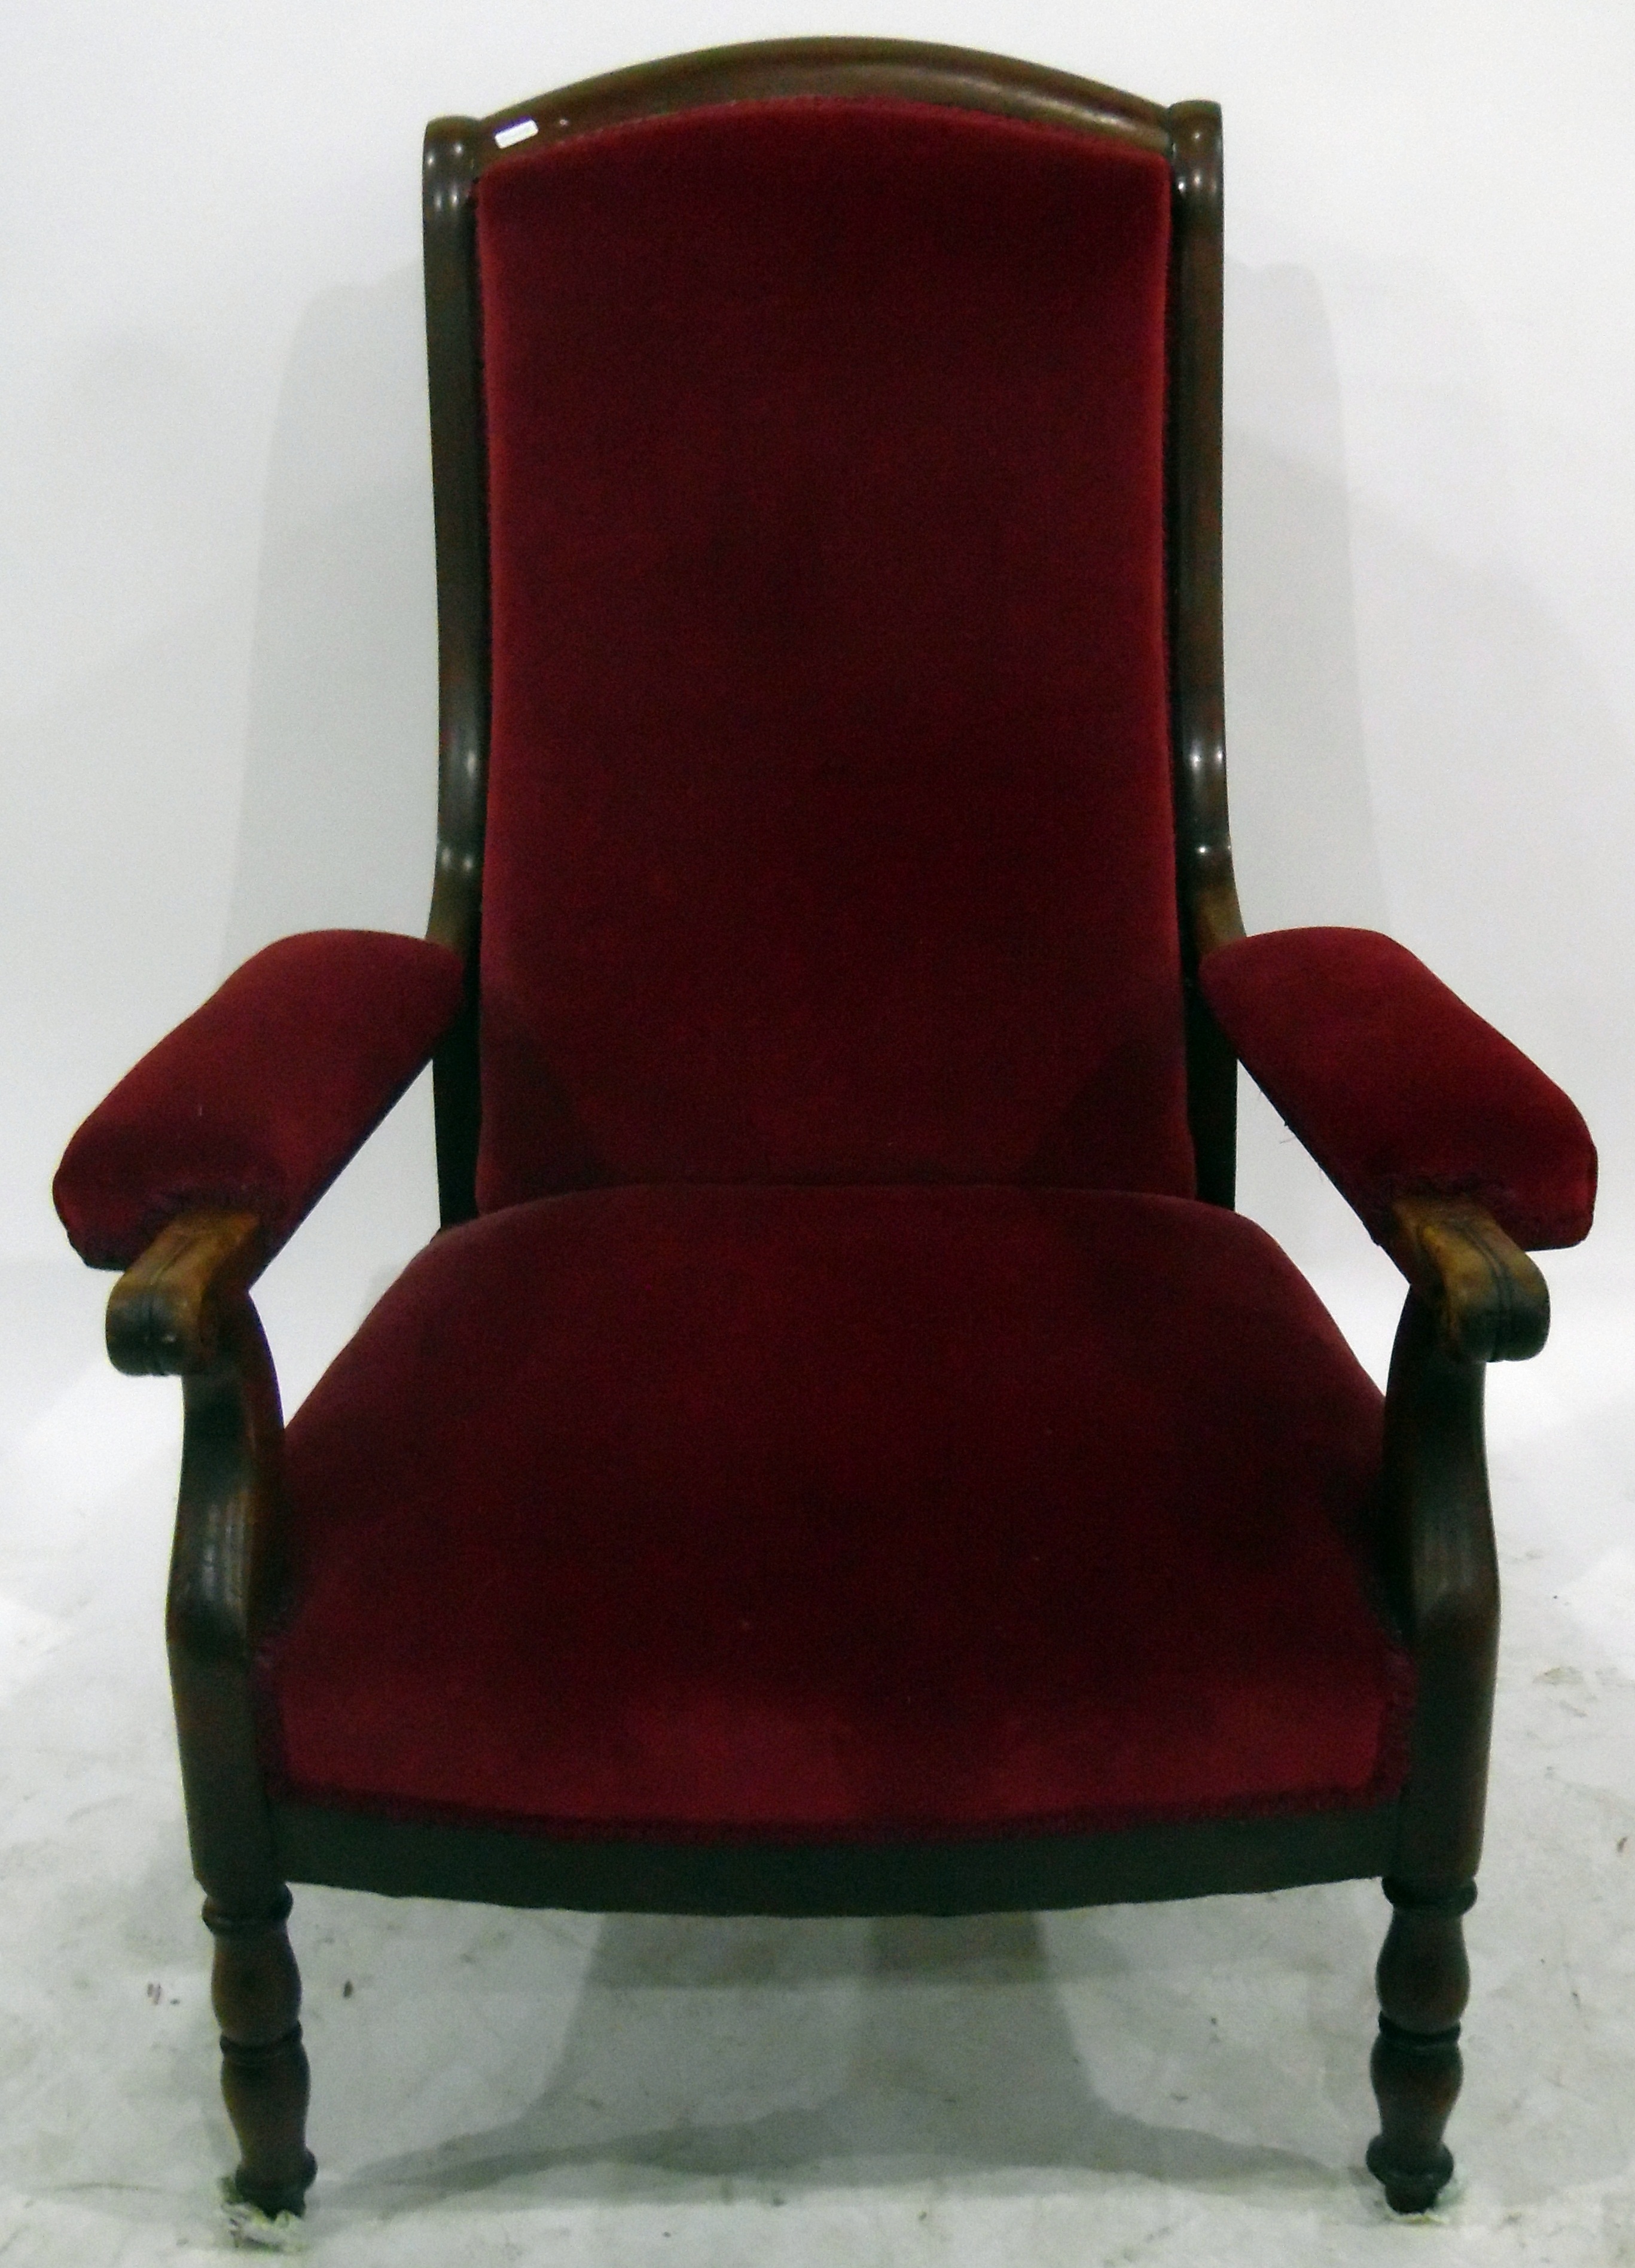 19th century mahogany and red upholstered open armchair with upholstered back and seat, - Image 2 of 2